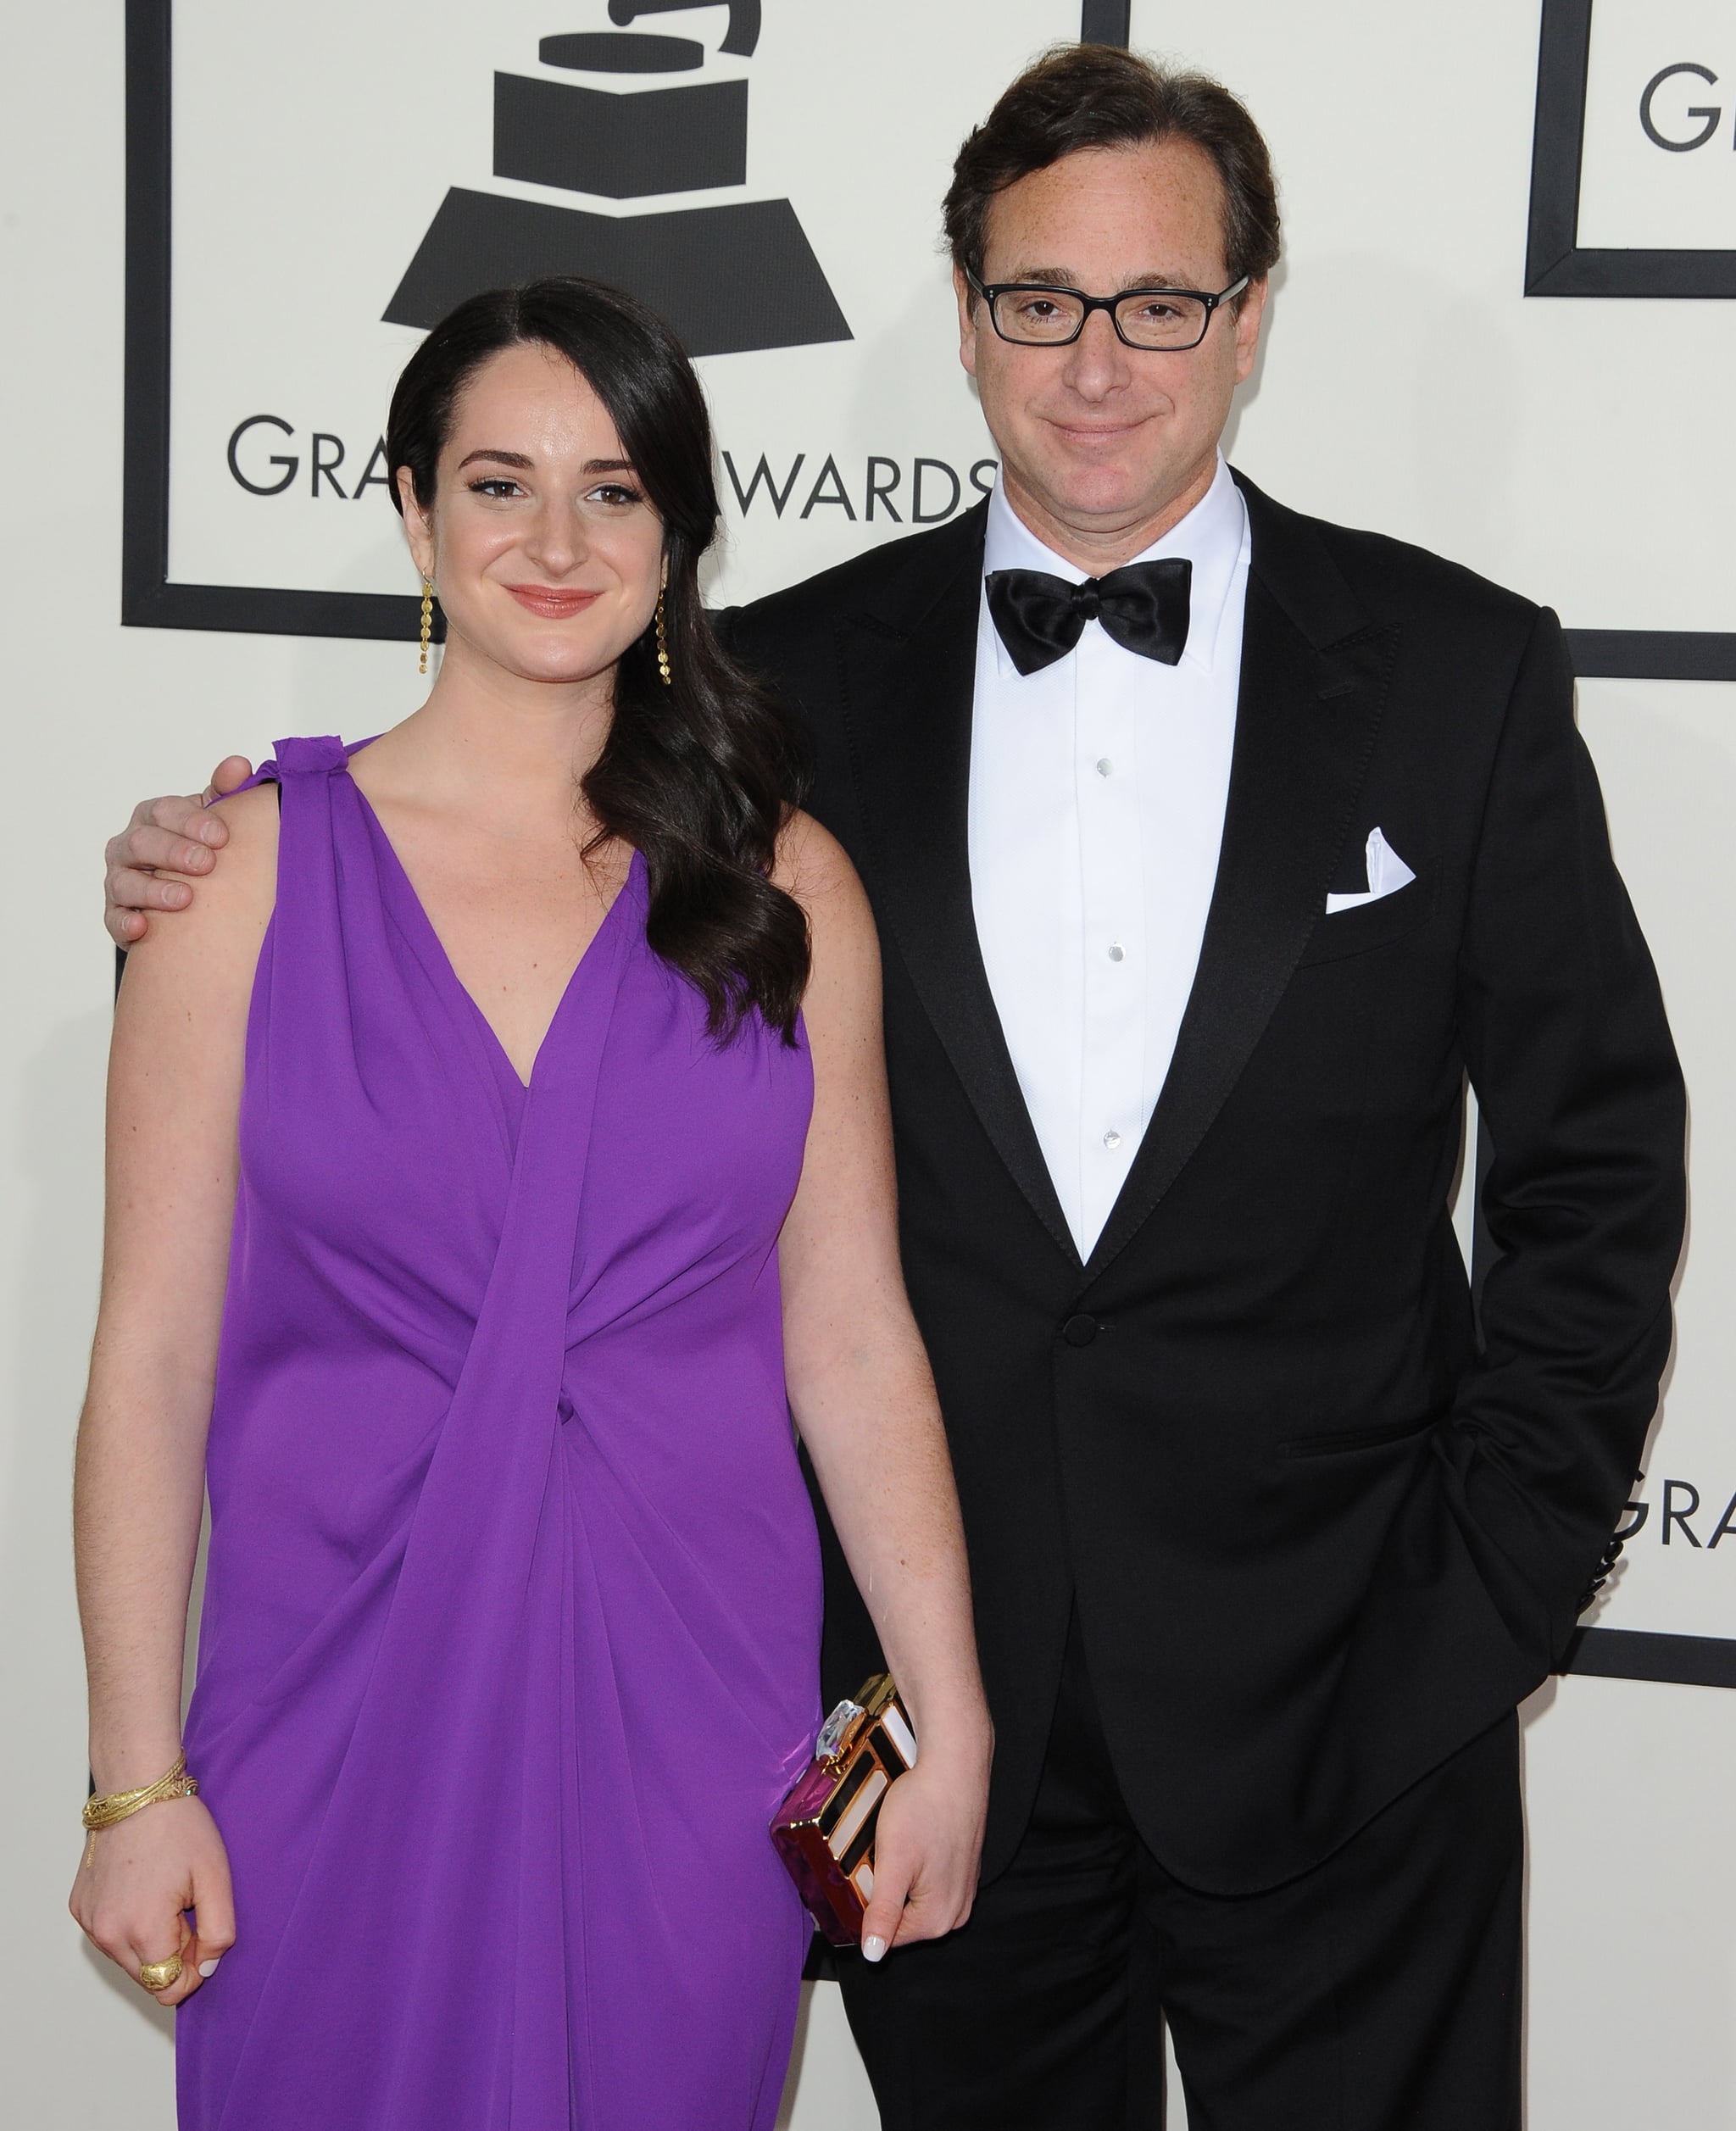 LOS ANGELES, CA - JANUARY 26:  Comedian Bob Saget (R) and daughter Lara Saget arrive at the 56th GRAMMY Awards at Staples Center on January 26, 2014 in Los Angeles, California.  (Photo by Axelle/Bauer-Griffin/FilmMagic)